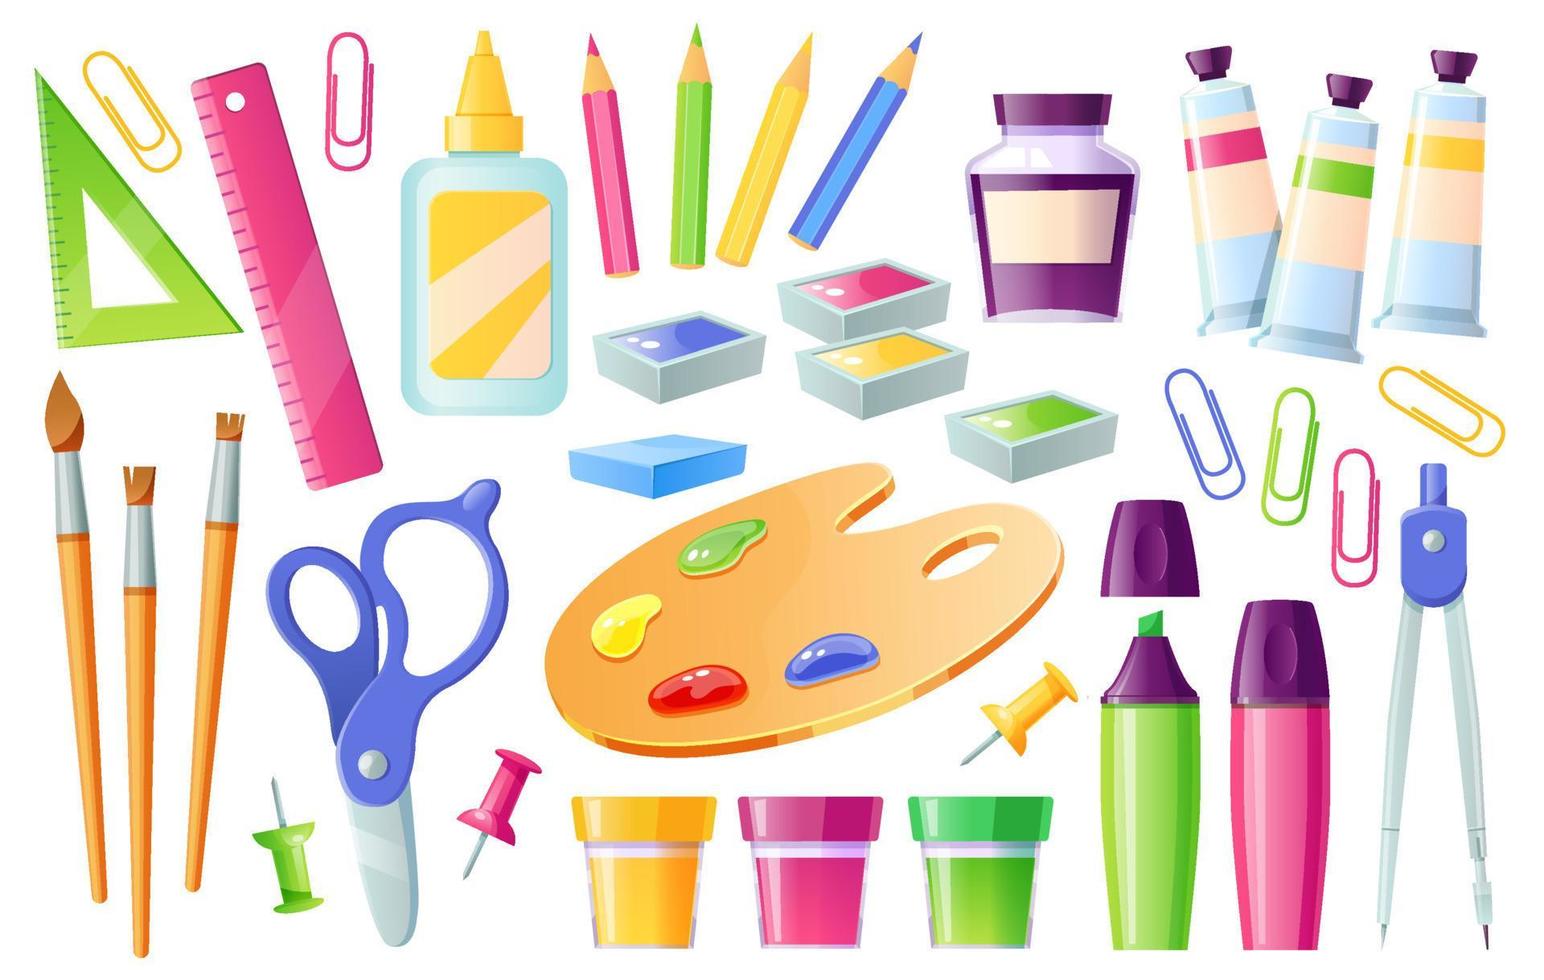 School supplies and stationery, learning items set vector